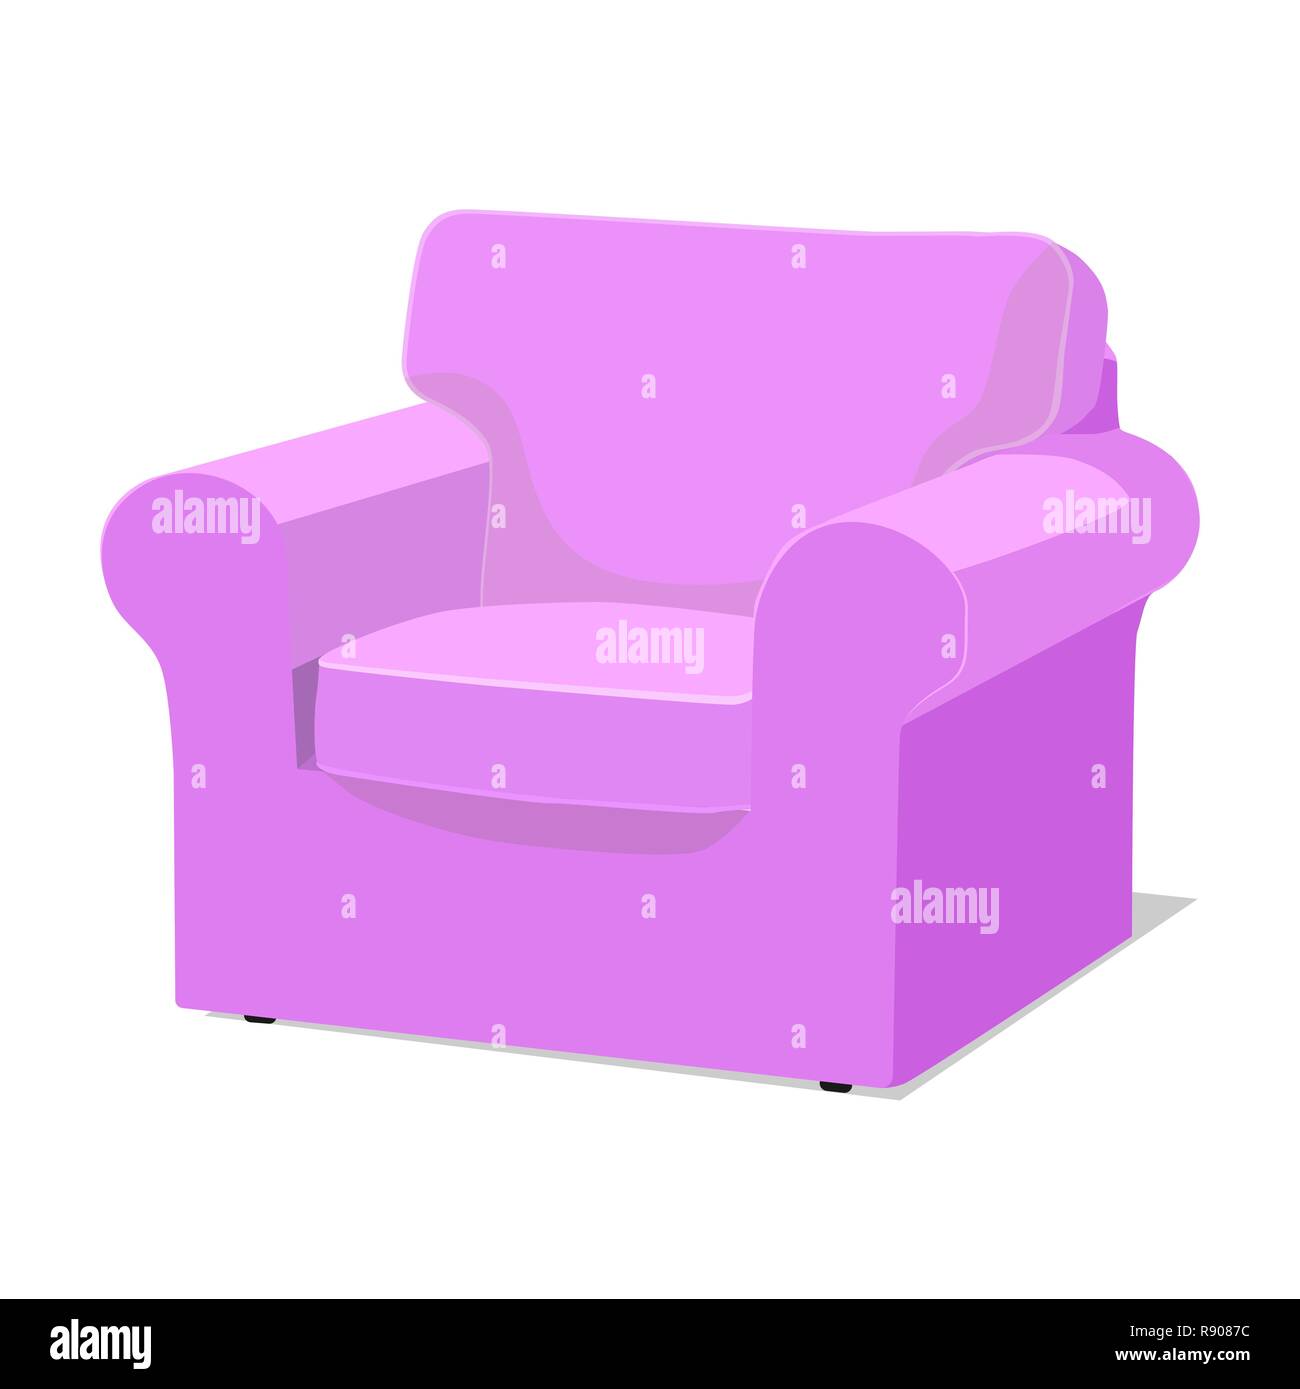 Modern purple soft armchair with upholstery - interior design element isolated on white background. Stock Vector